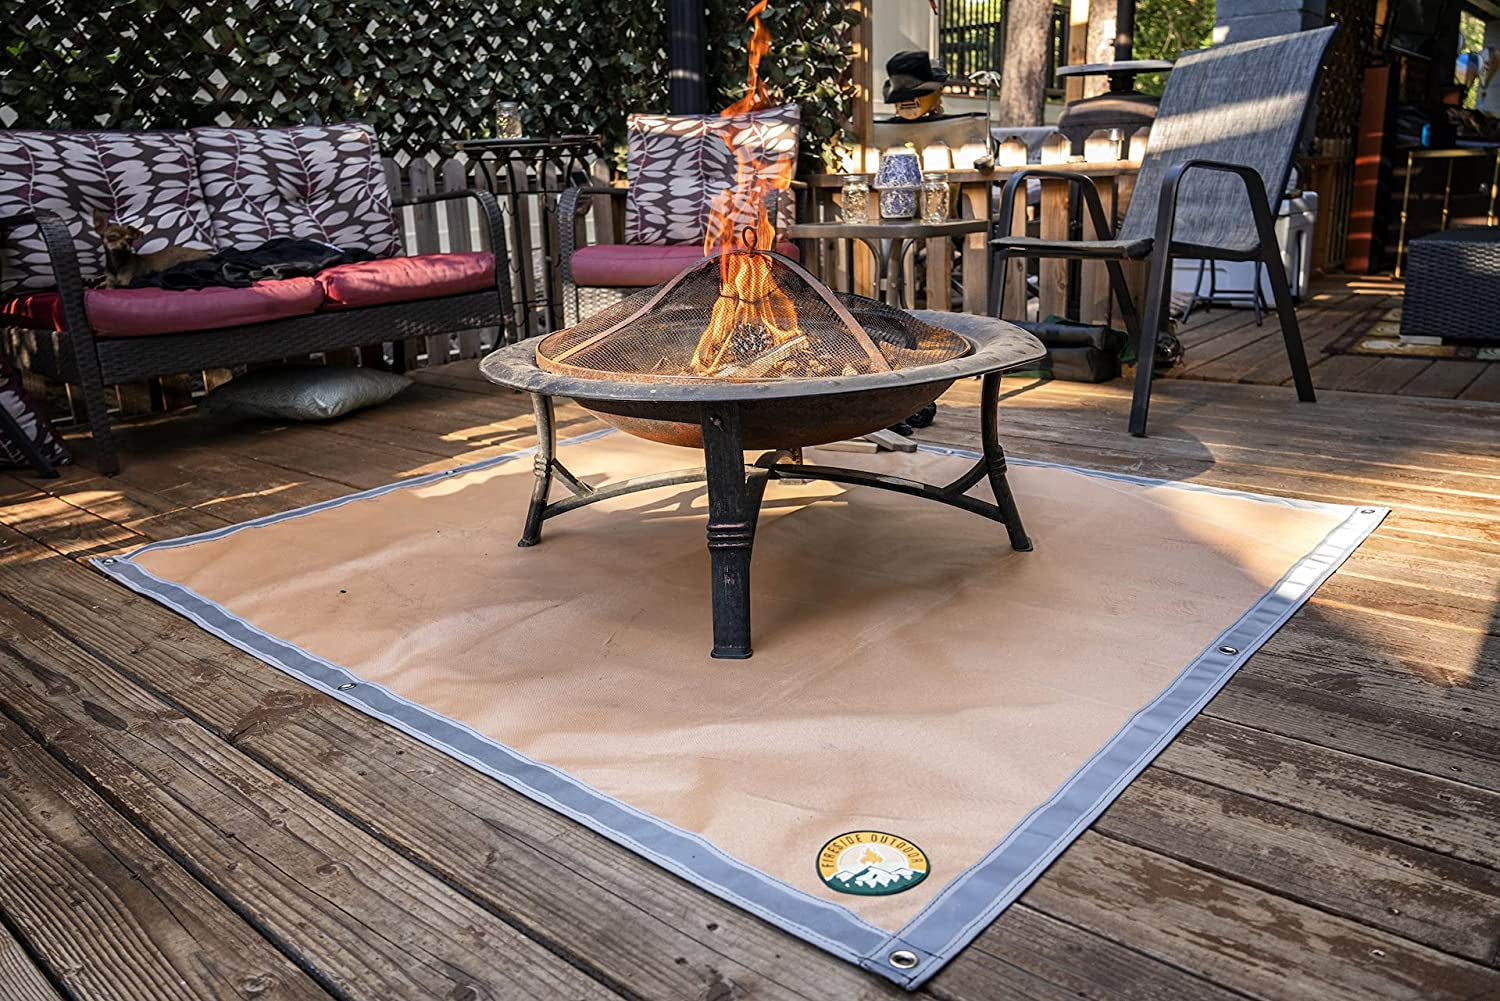 Campfire Defender Protect Preserve, Ember Mat - Protect the Area underneath Your BBQ Grill or Fire Pit from Grease and Popping Embers